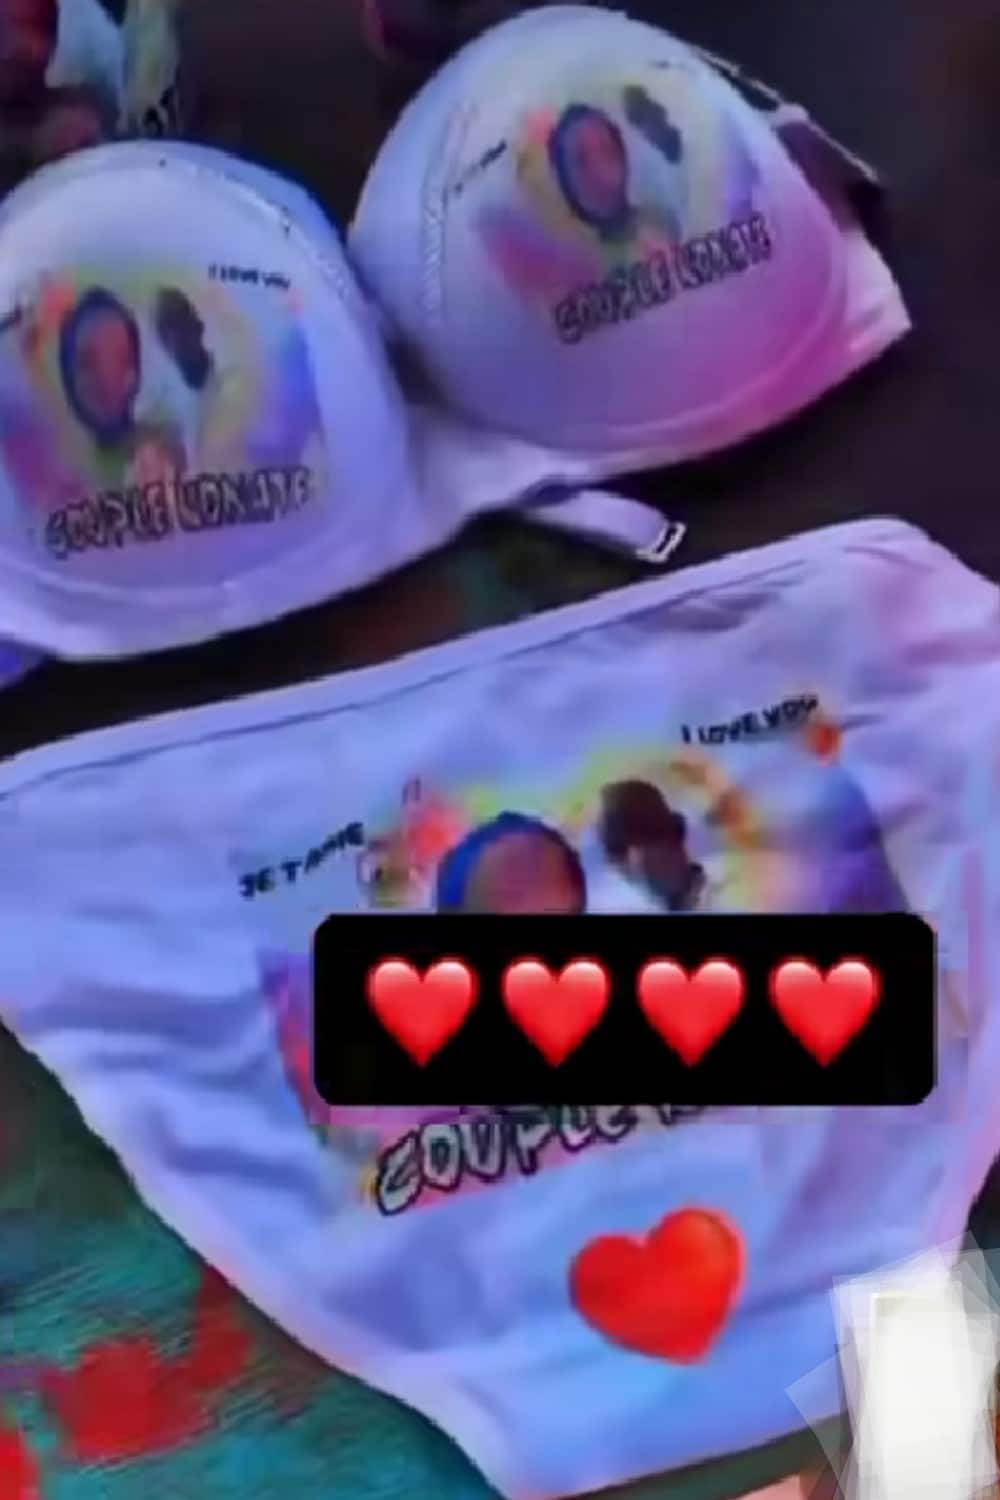 Where una dey see this love?" -Reactions erupt as boyfriend surprises babe with customized underwear featuring their faces